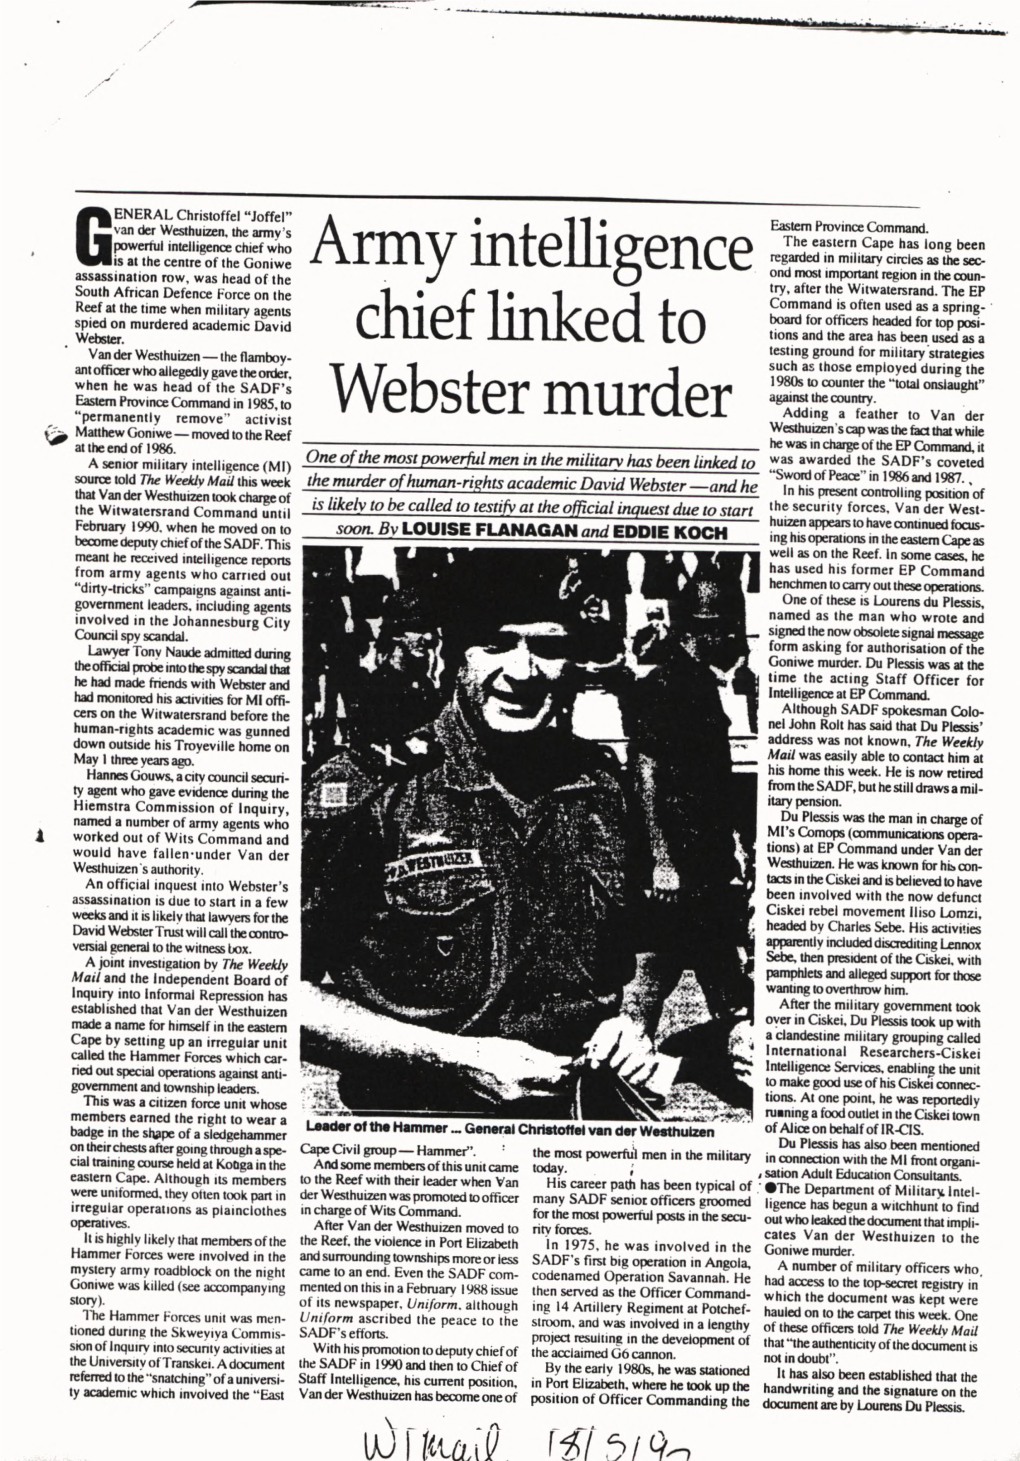 Army Intelligence Chief Linked to Webster Murder